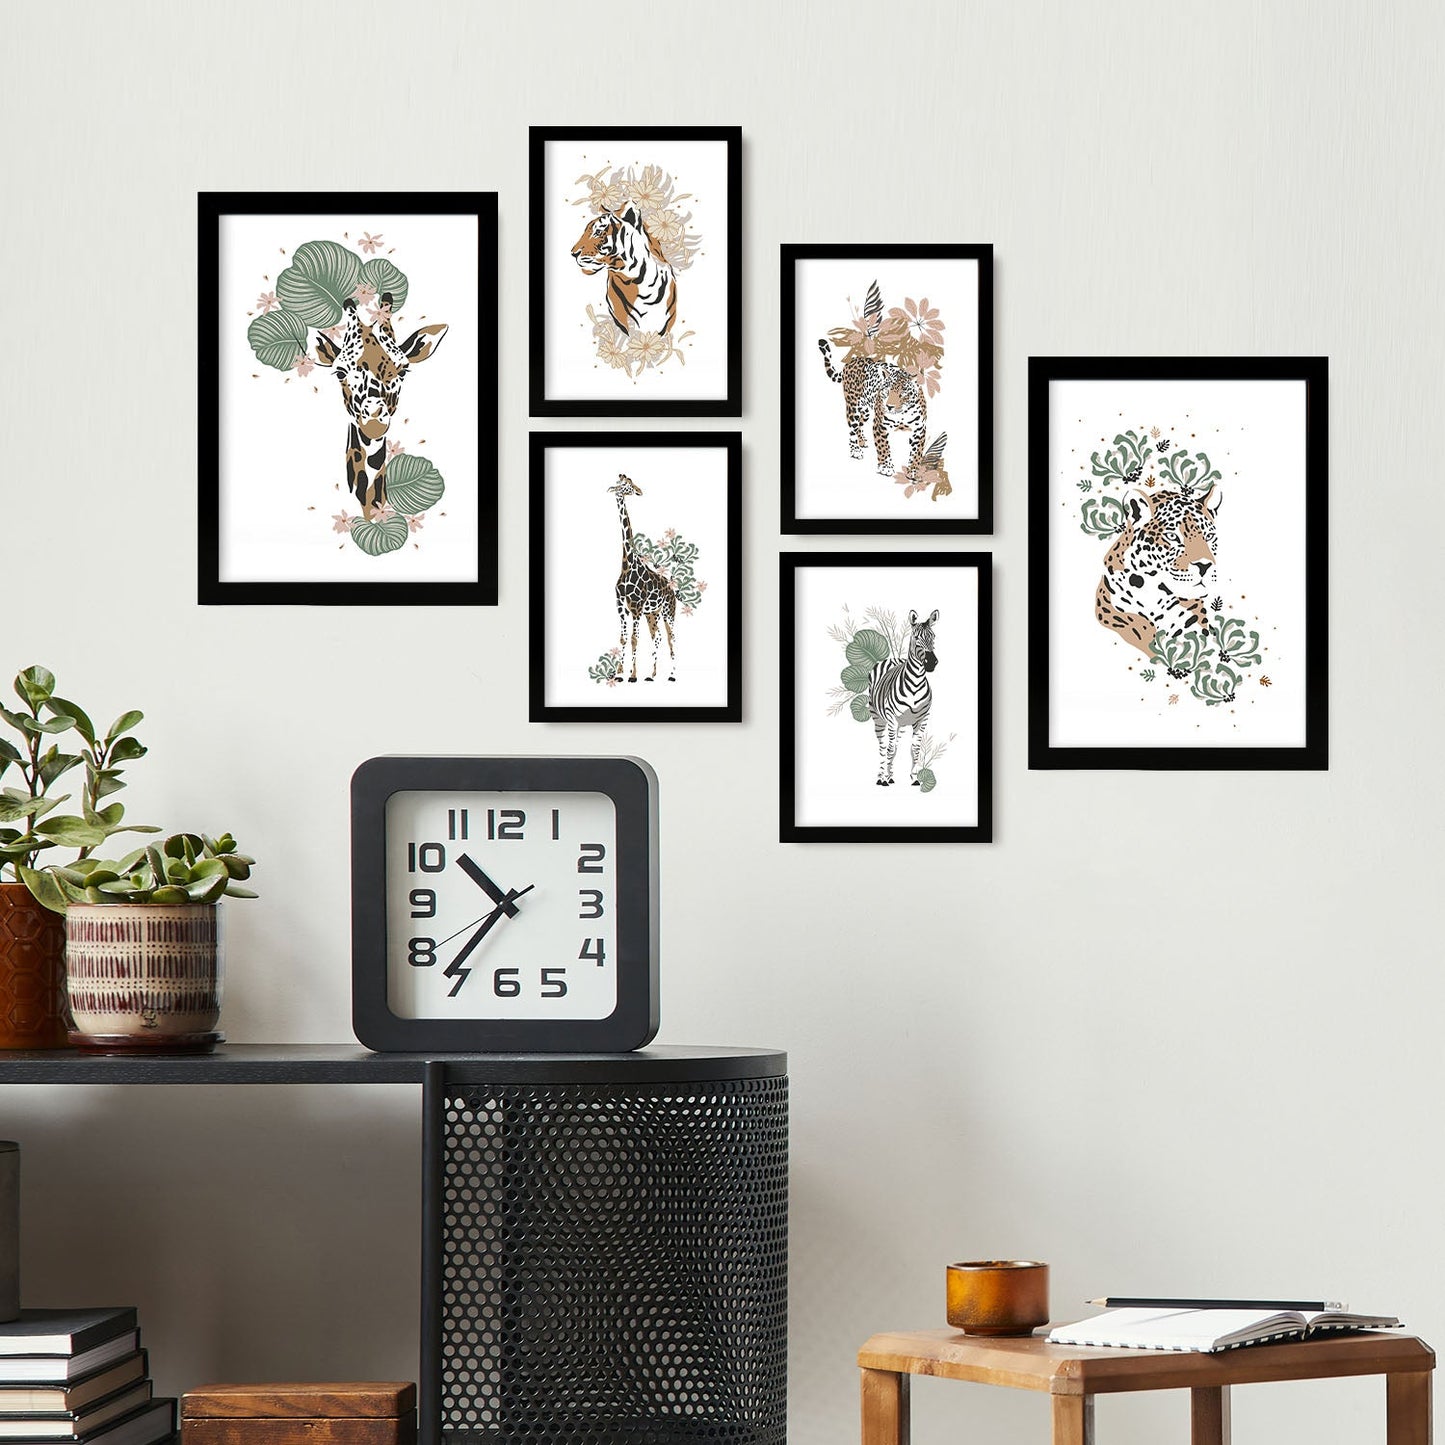 Nacnic animales selva. Aesthetic Wall Art Prints for Bedroom or Living Room Design.